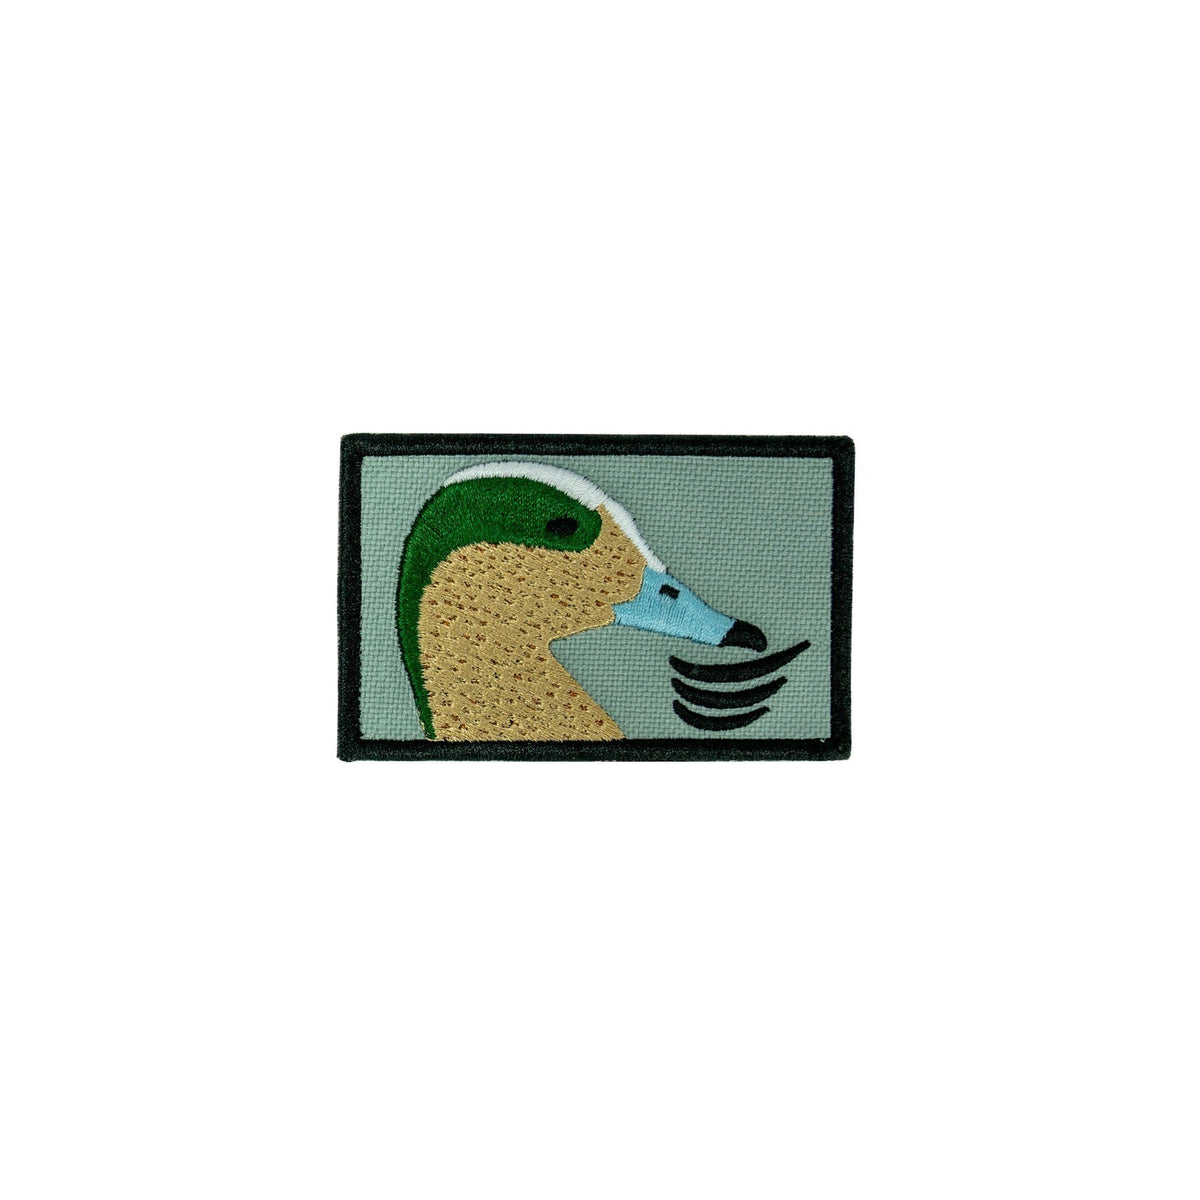 Tangle Free Wigeon Patch - Pacific Flyway Supplies